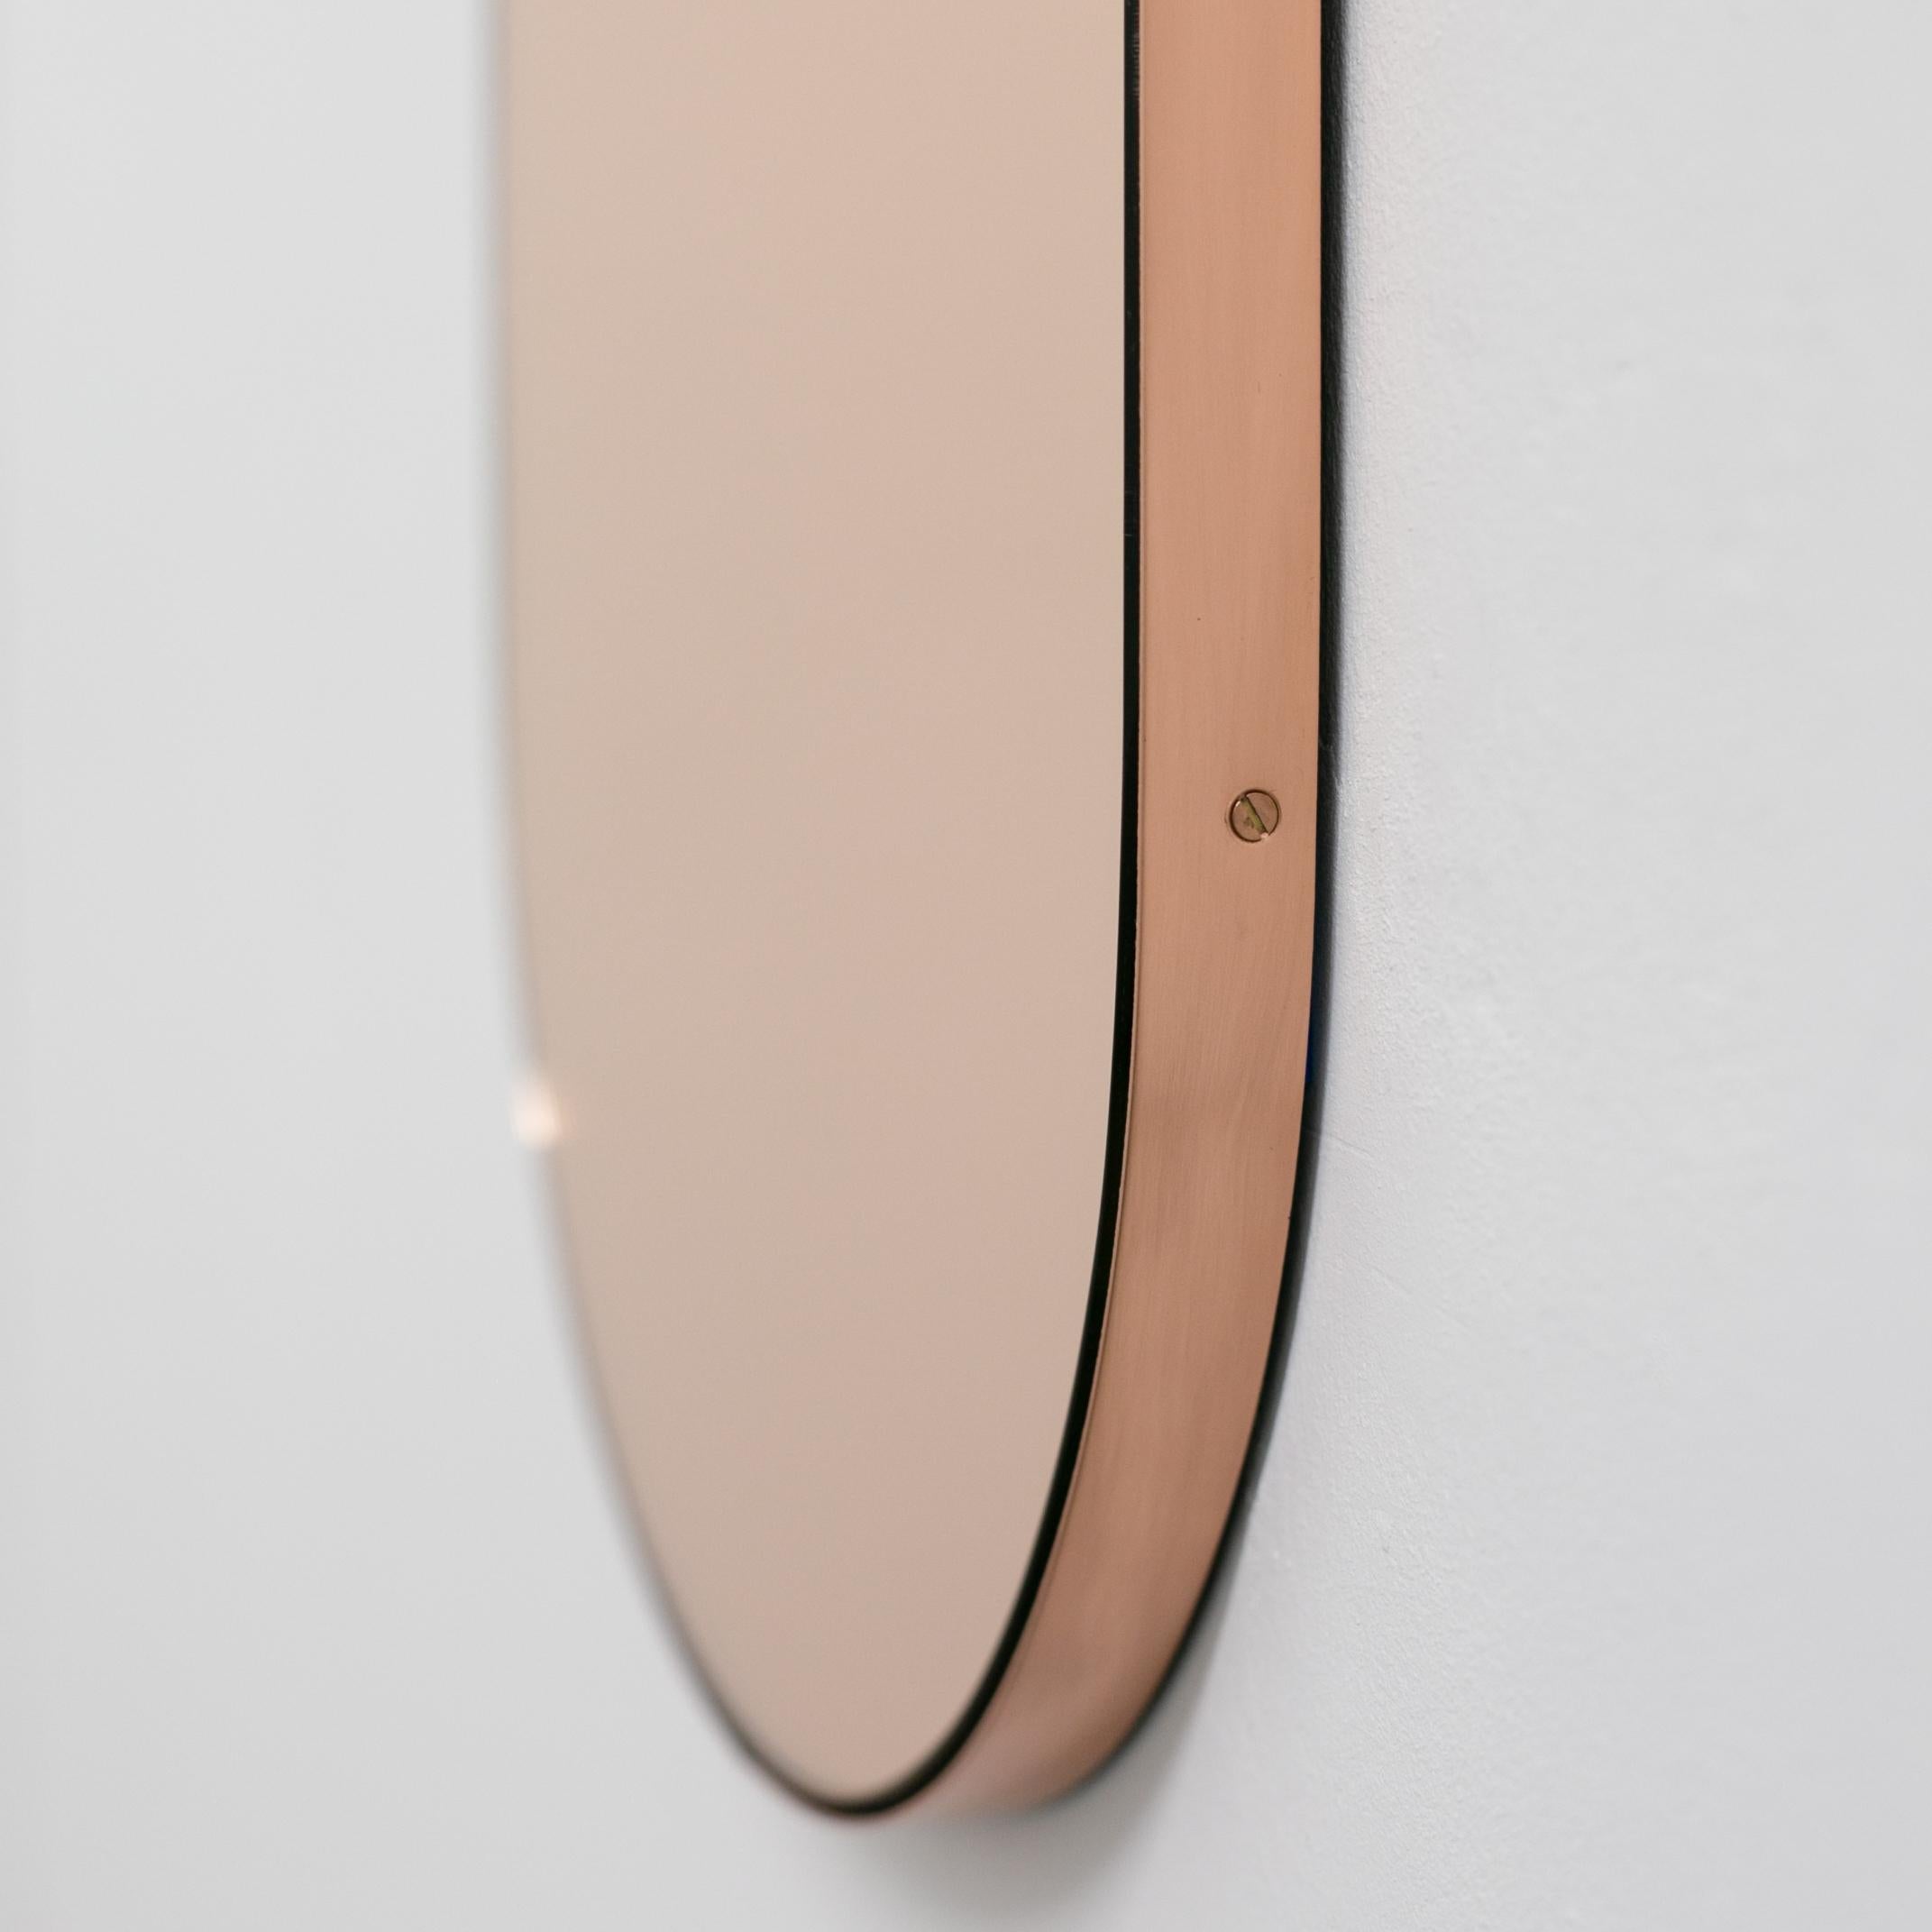 Capsula Capsule Pill Shaped Rose Gold Decorative Mirror with Copper Frame, Small In New Condition For Sale In London, GB